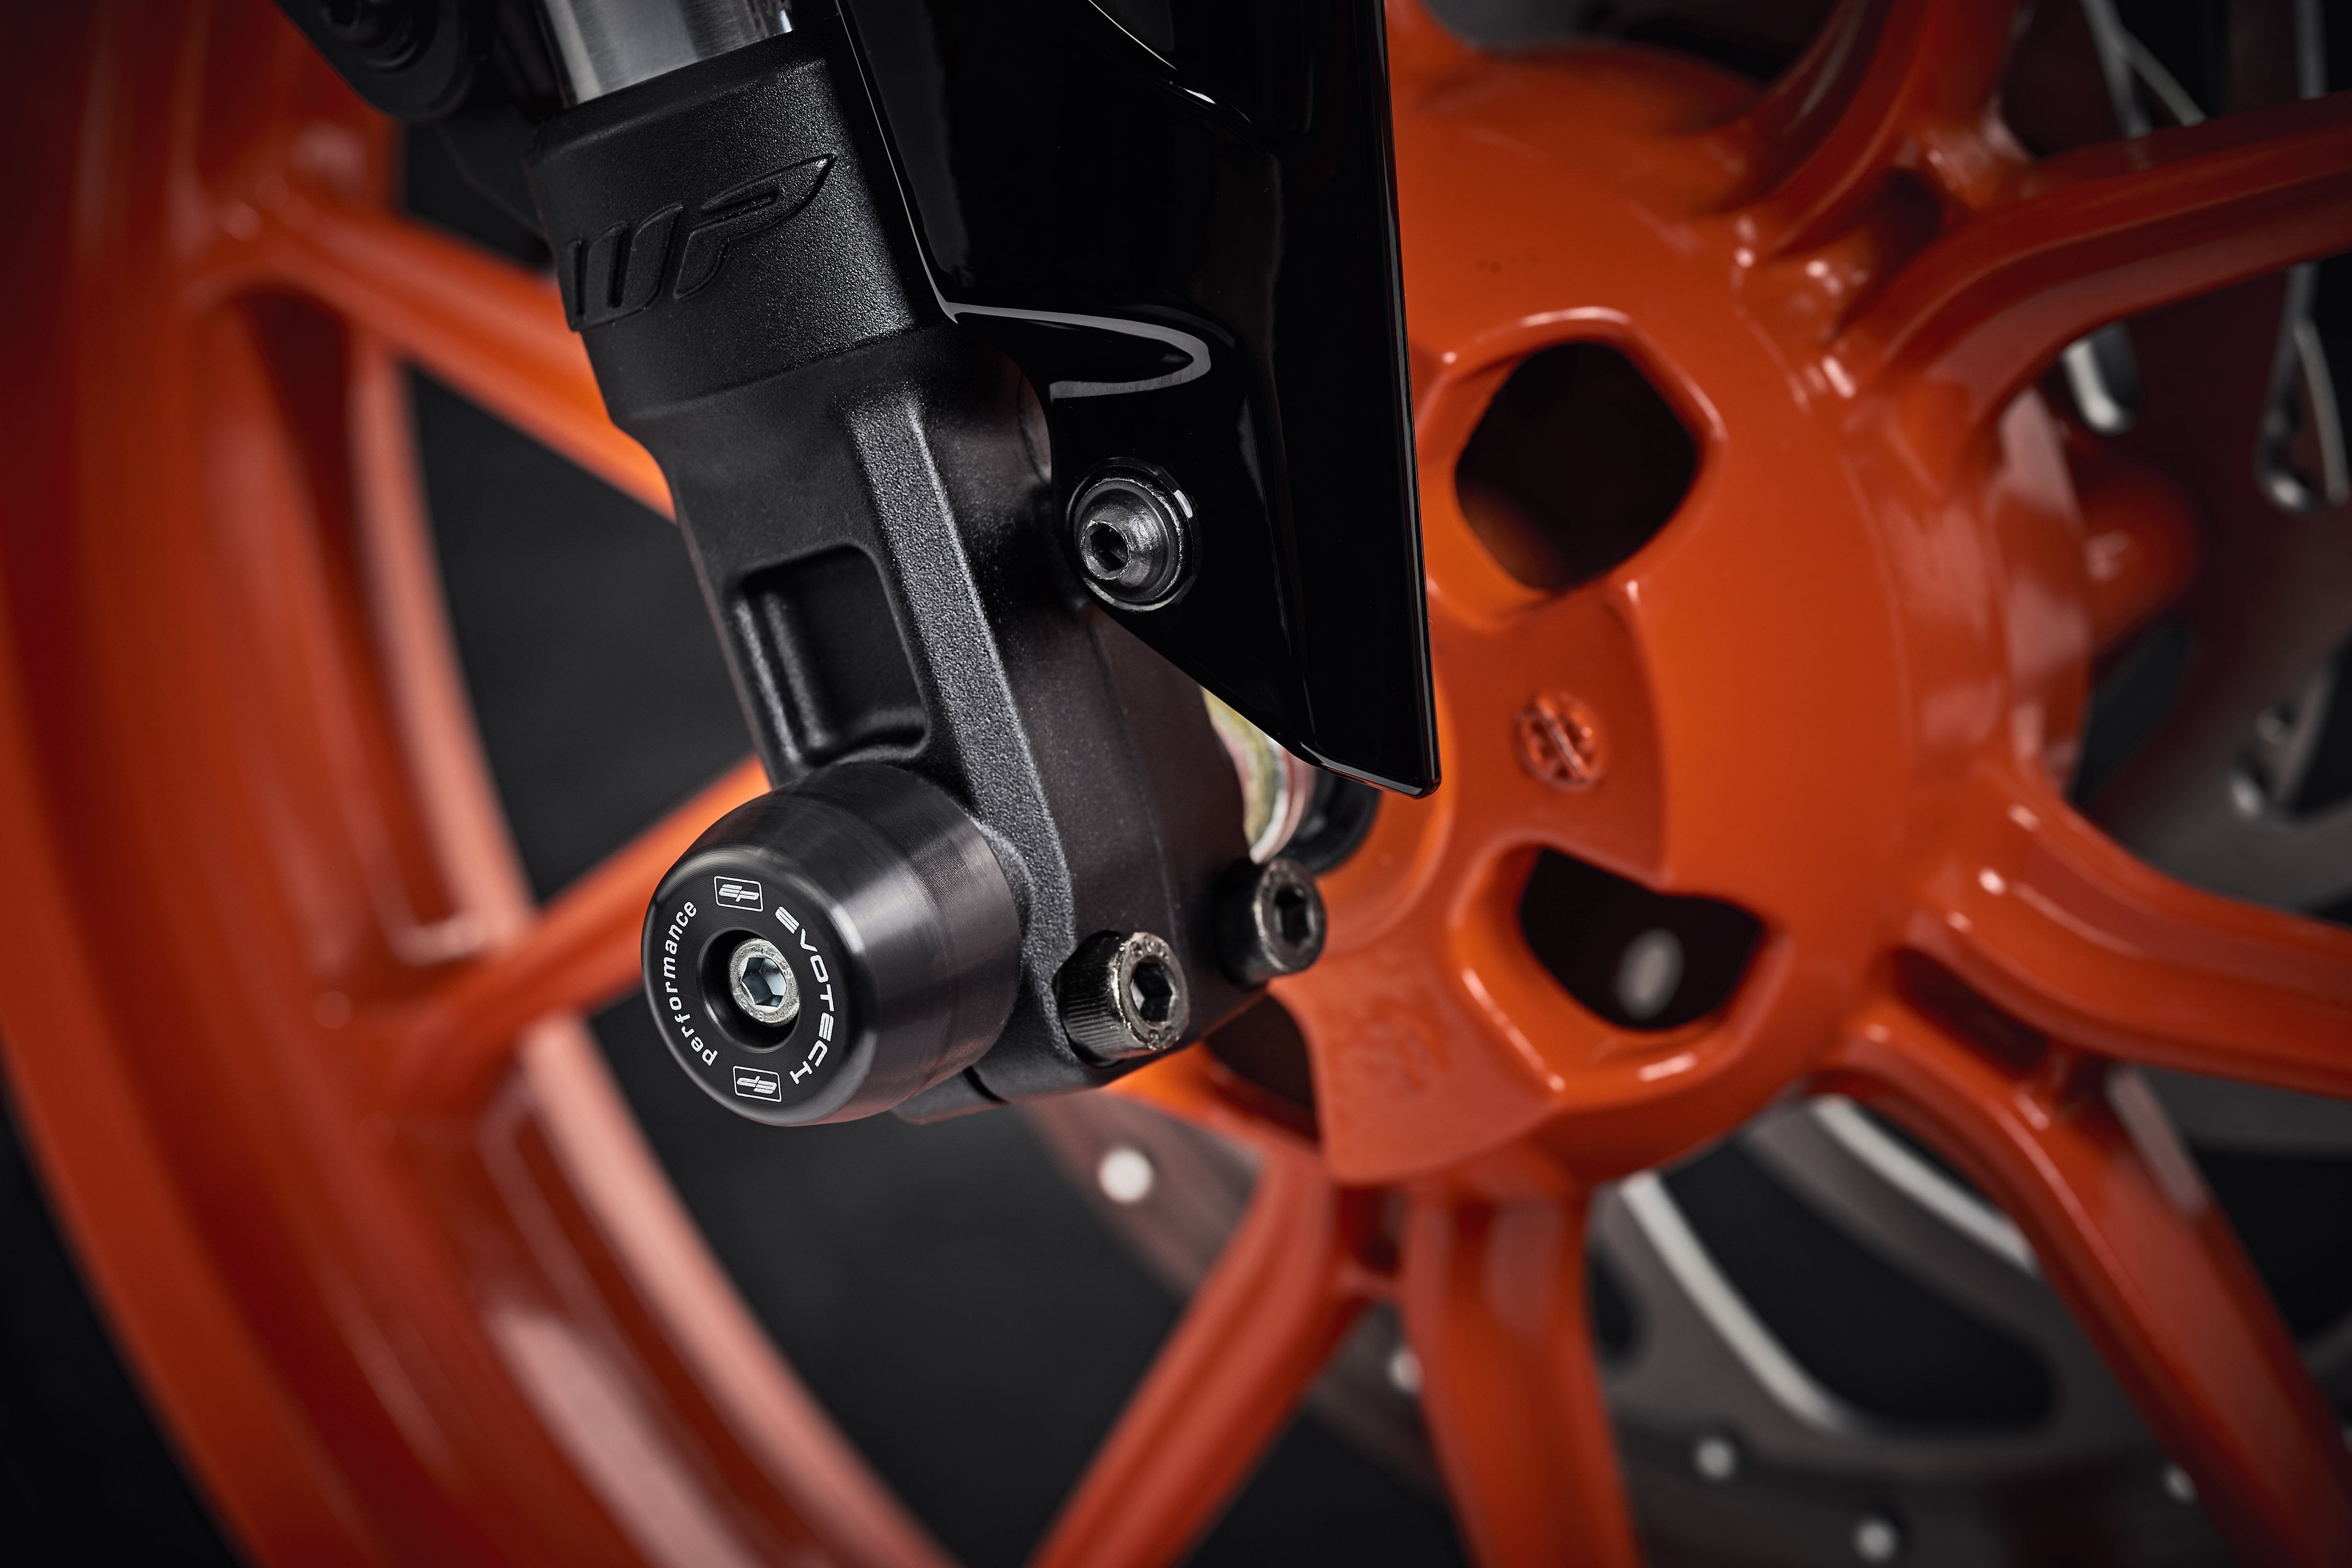 The lower front fork of the KTM RC 125 with EP Front Spindle Bobbins securely attached, offering crash protection to the motorcycleâs front wheel.